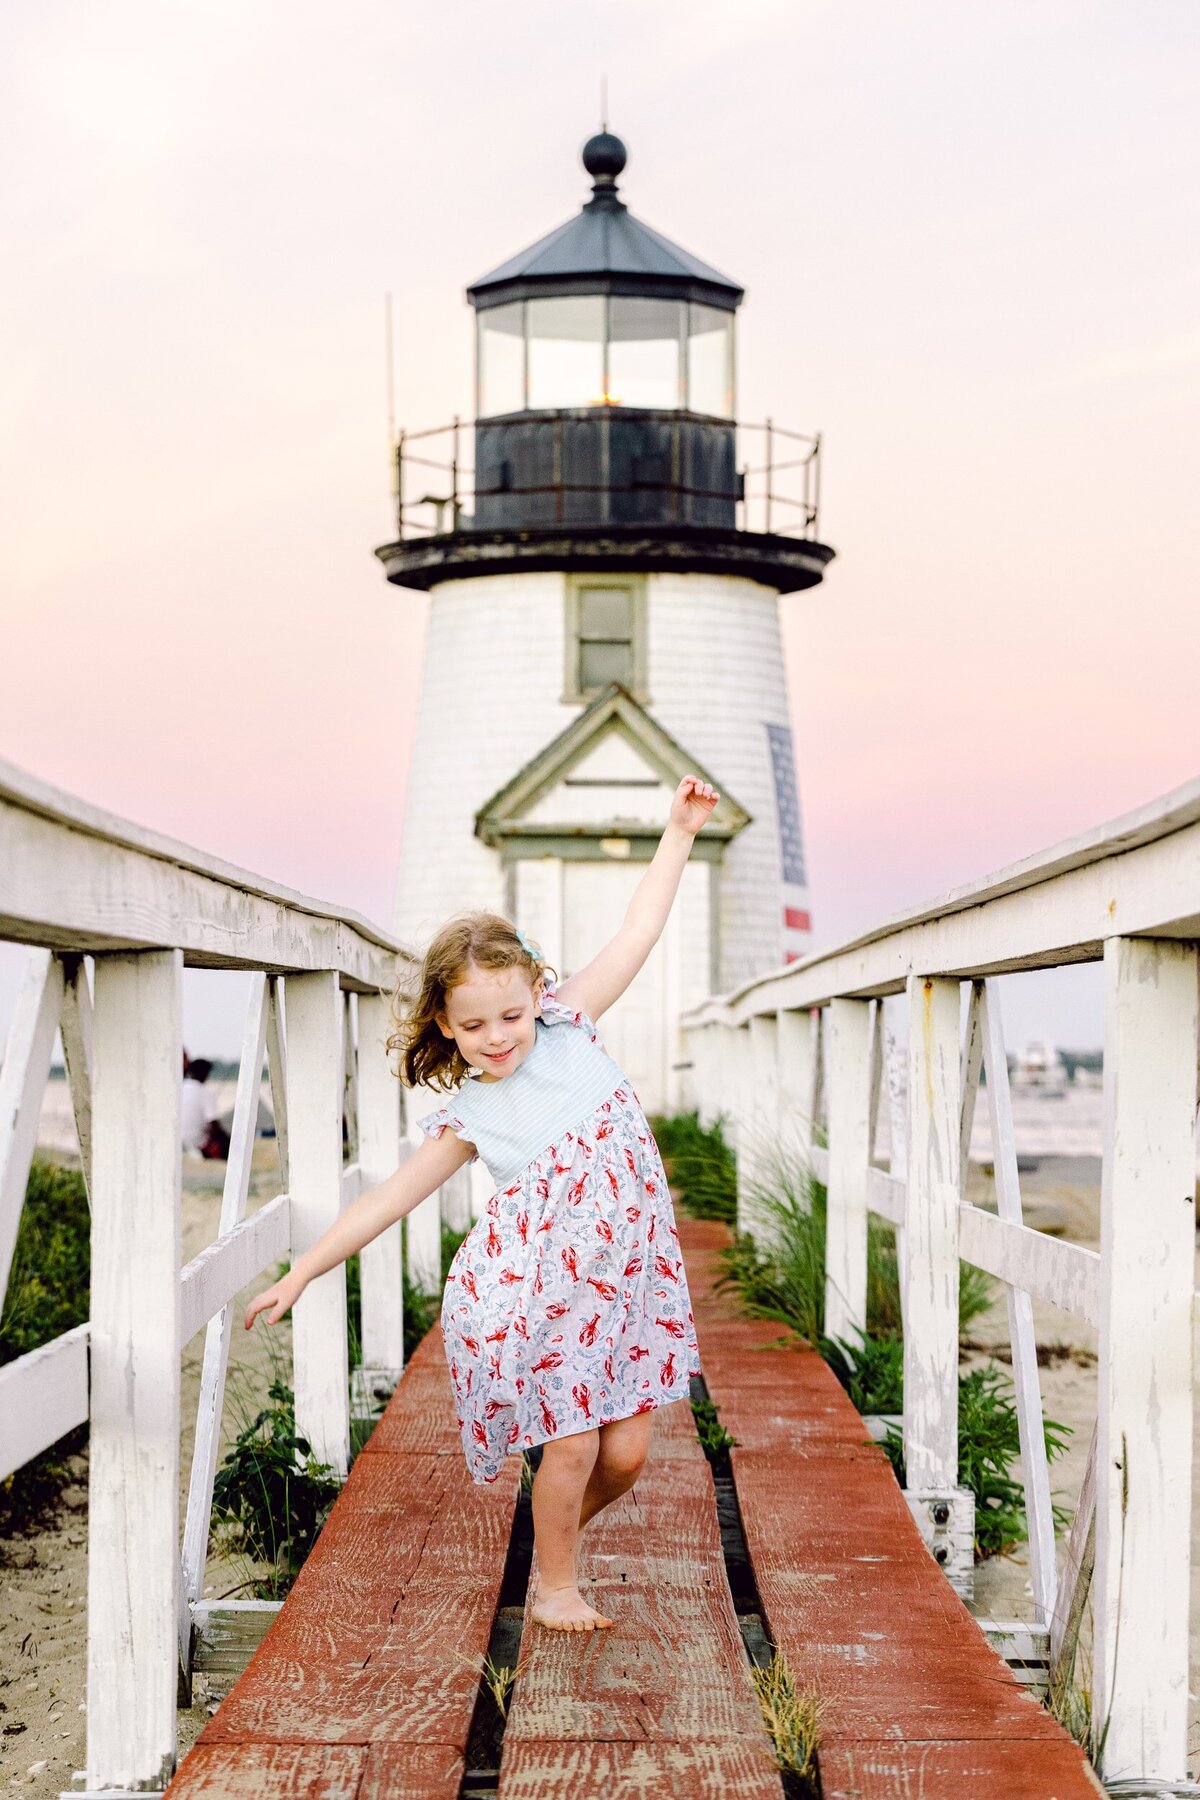 Child at Brant Point Lighthouse Nantucket